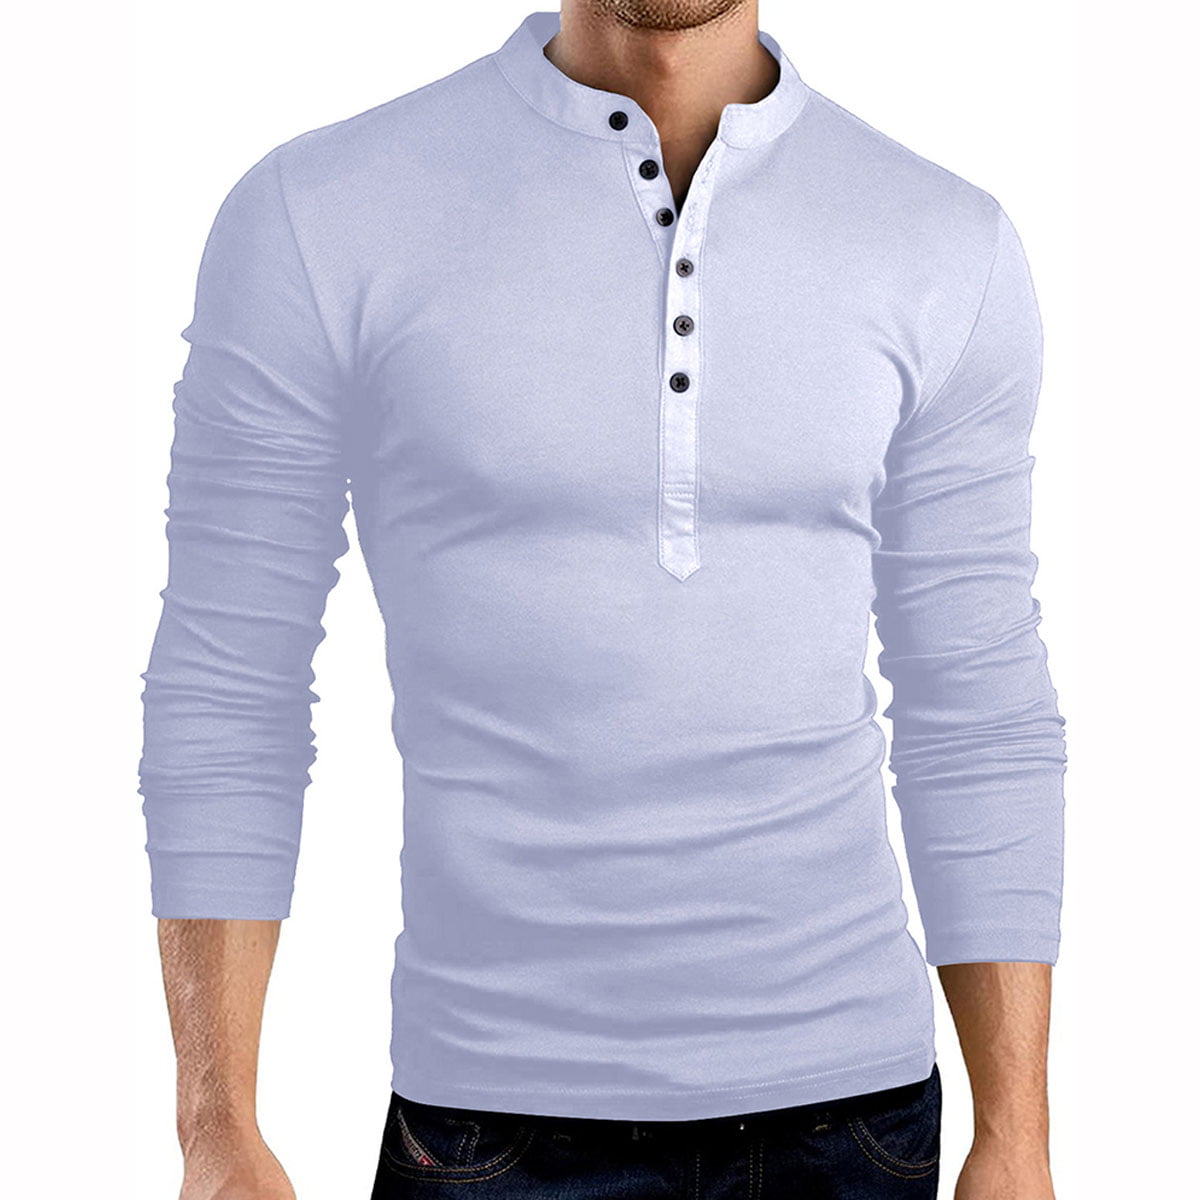 US Men's V Neck Long Sleeve Shirt Casual Slim Fit Muscle Tee T-Shirt Blouse Tops 